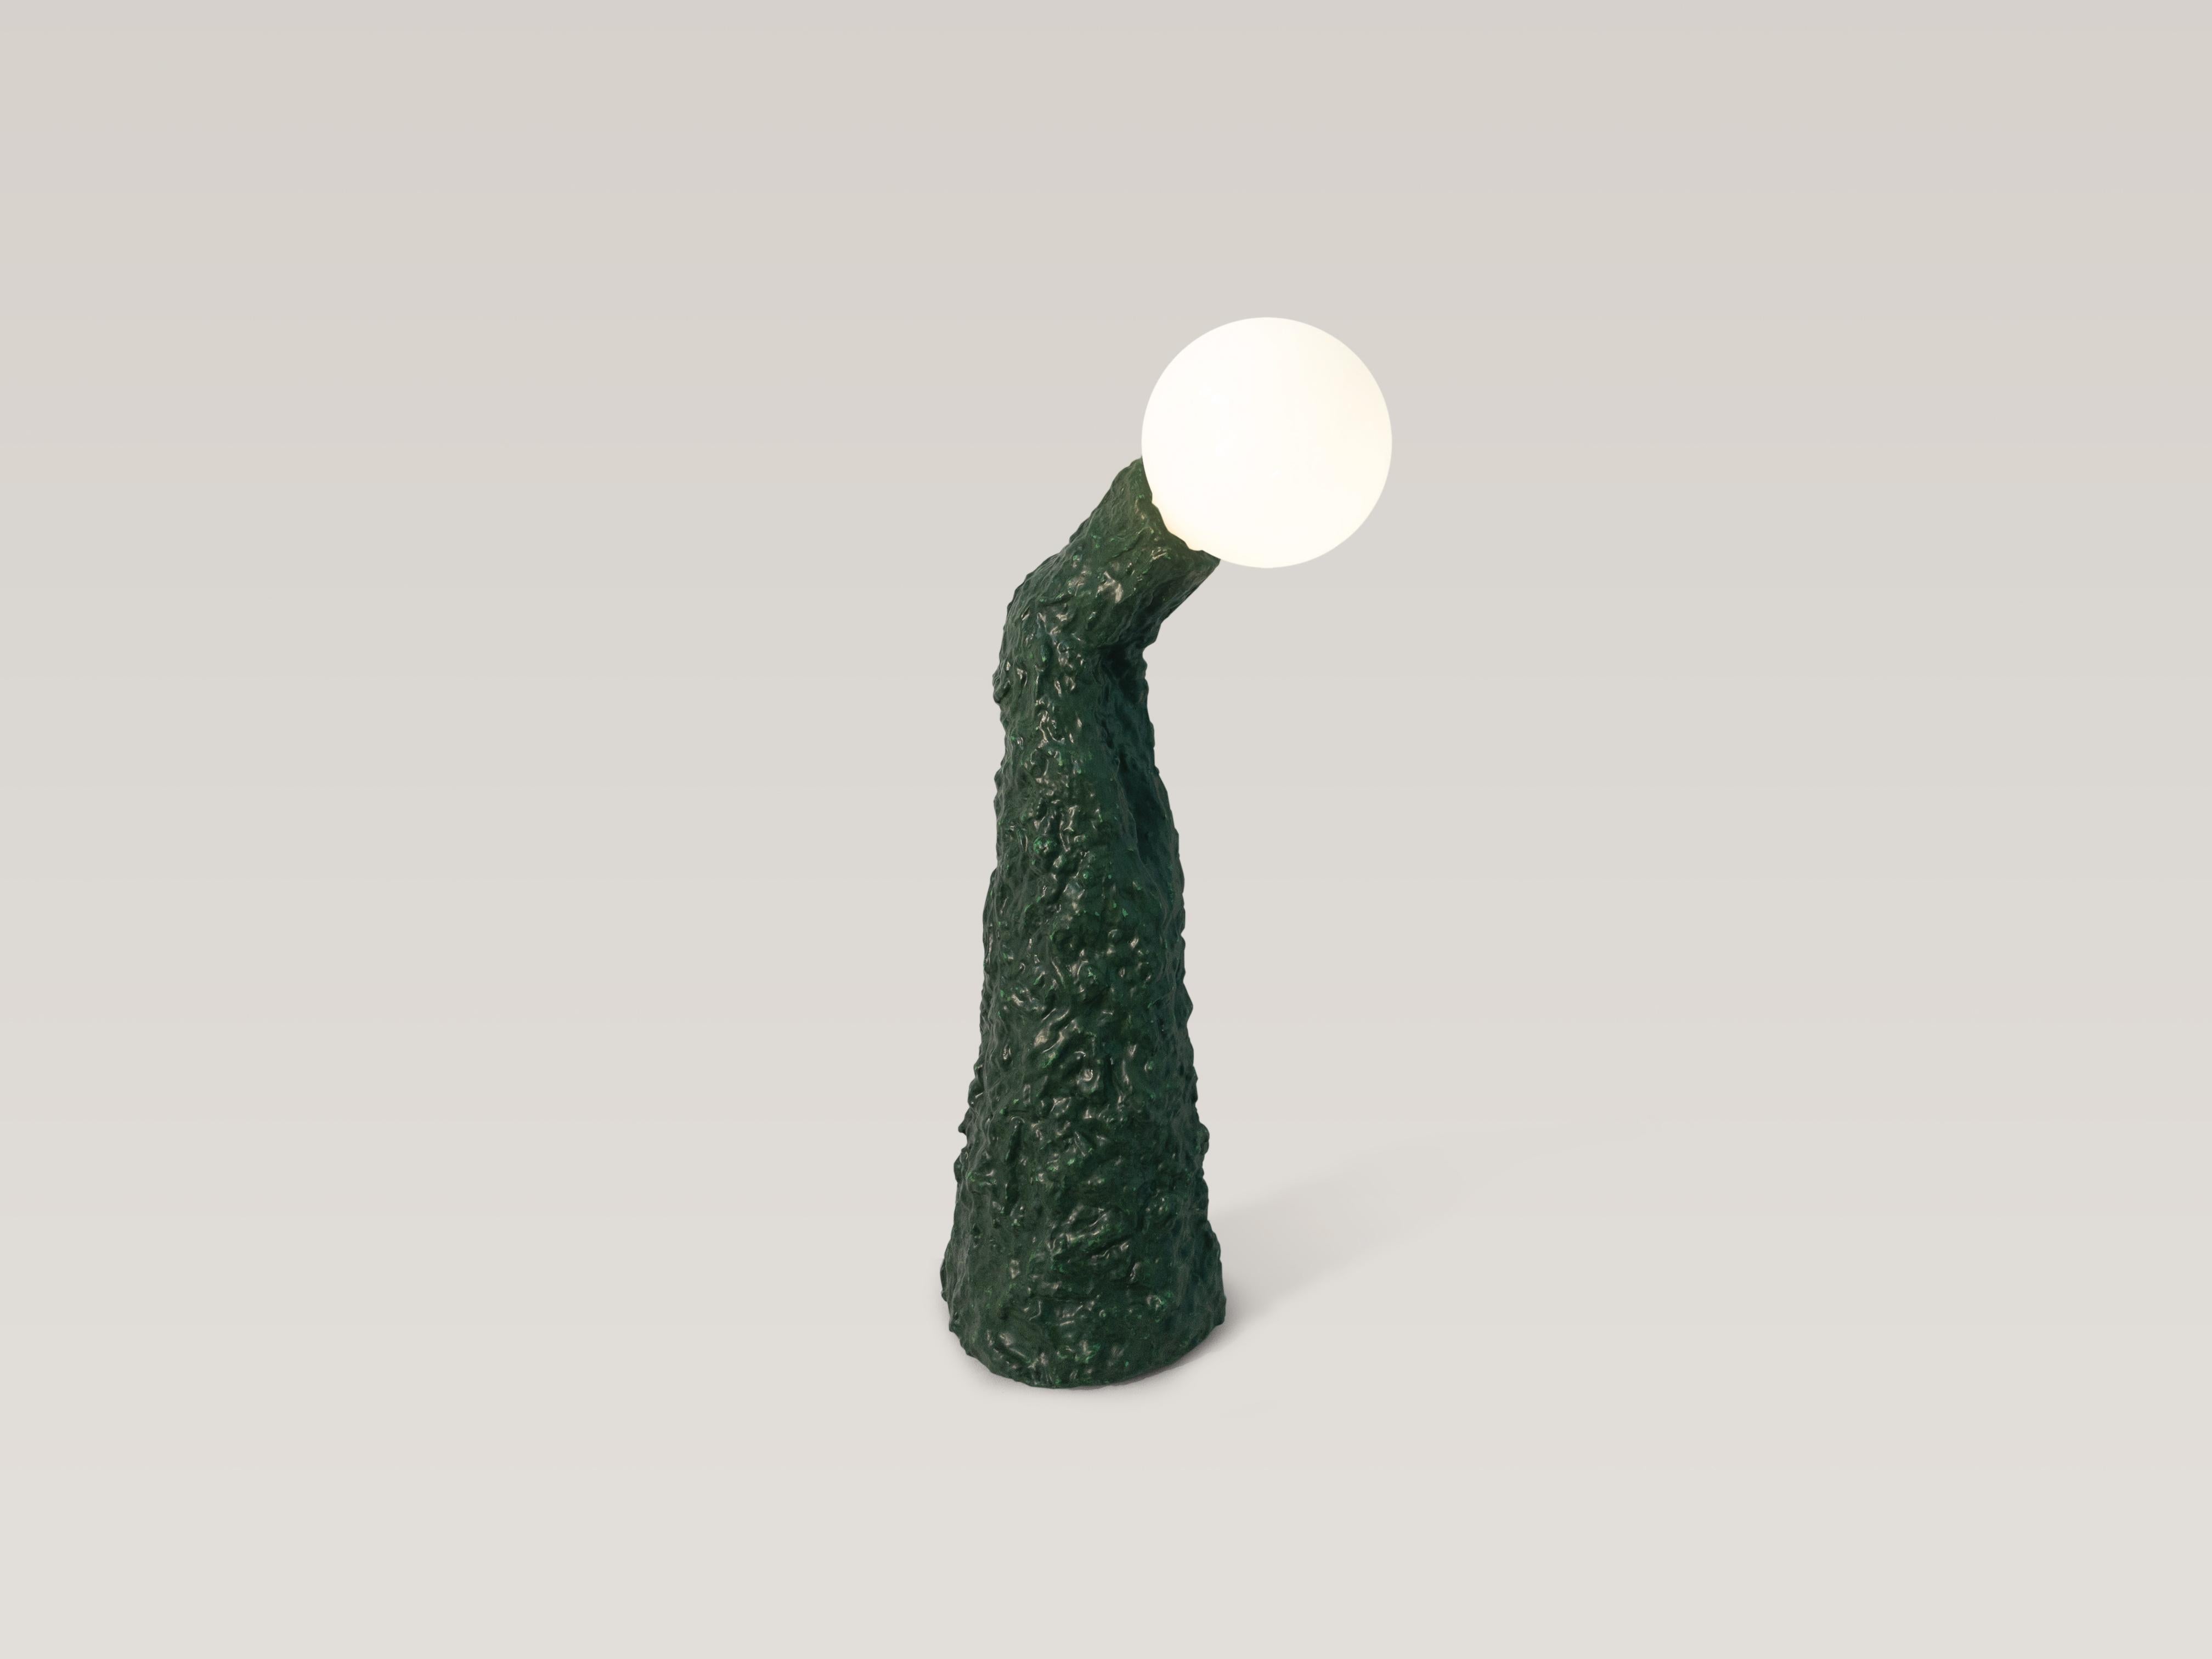 Organic Modern Contemporary Dimmable Tall Green Table Lamp by Nicola Cecutti. For Sale